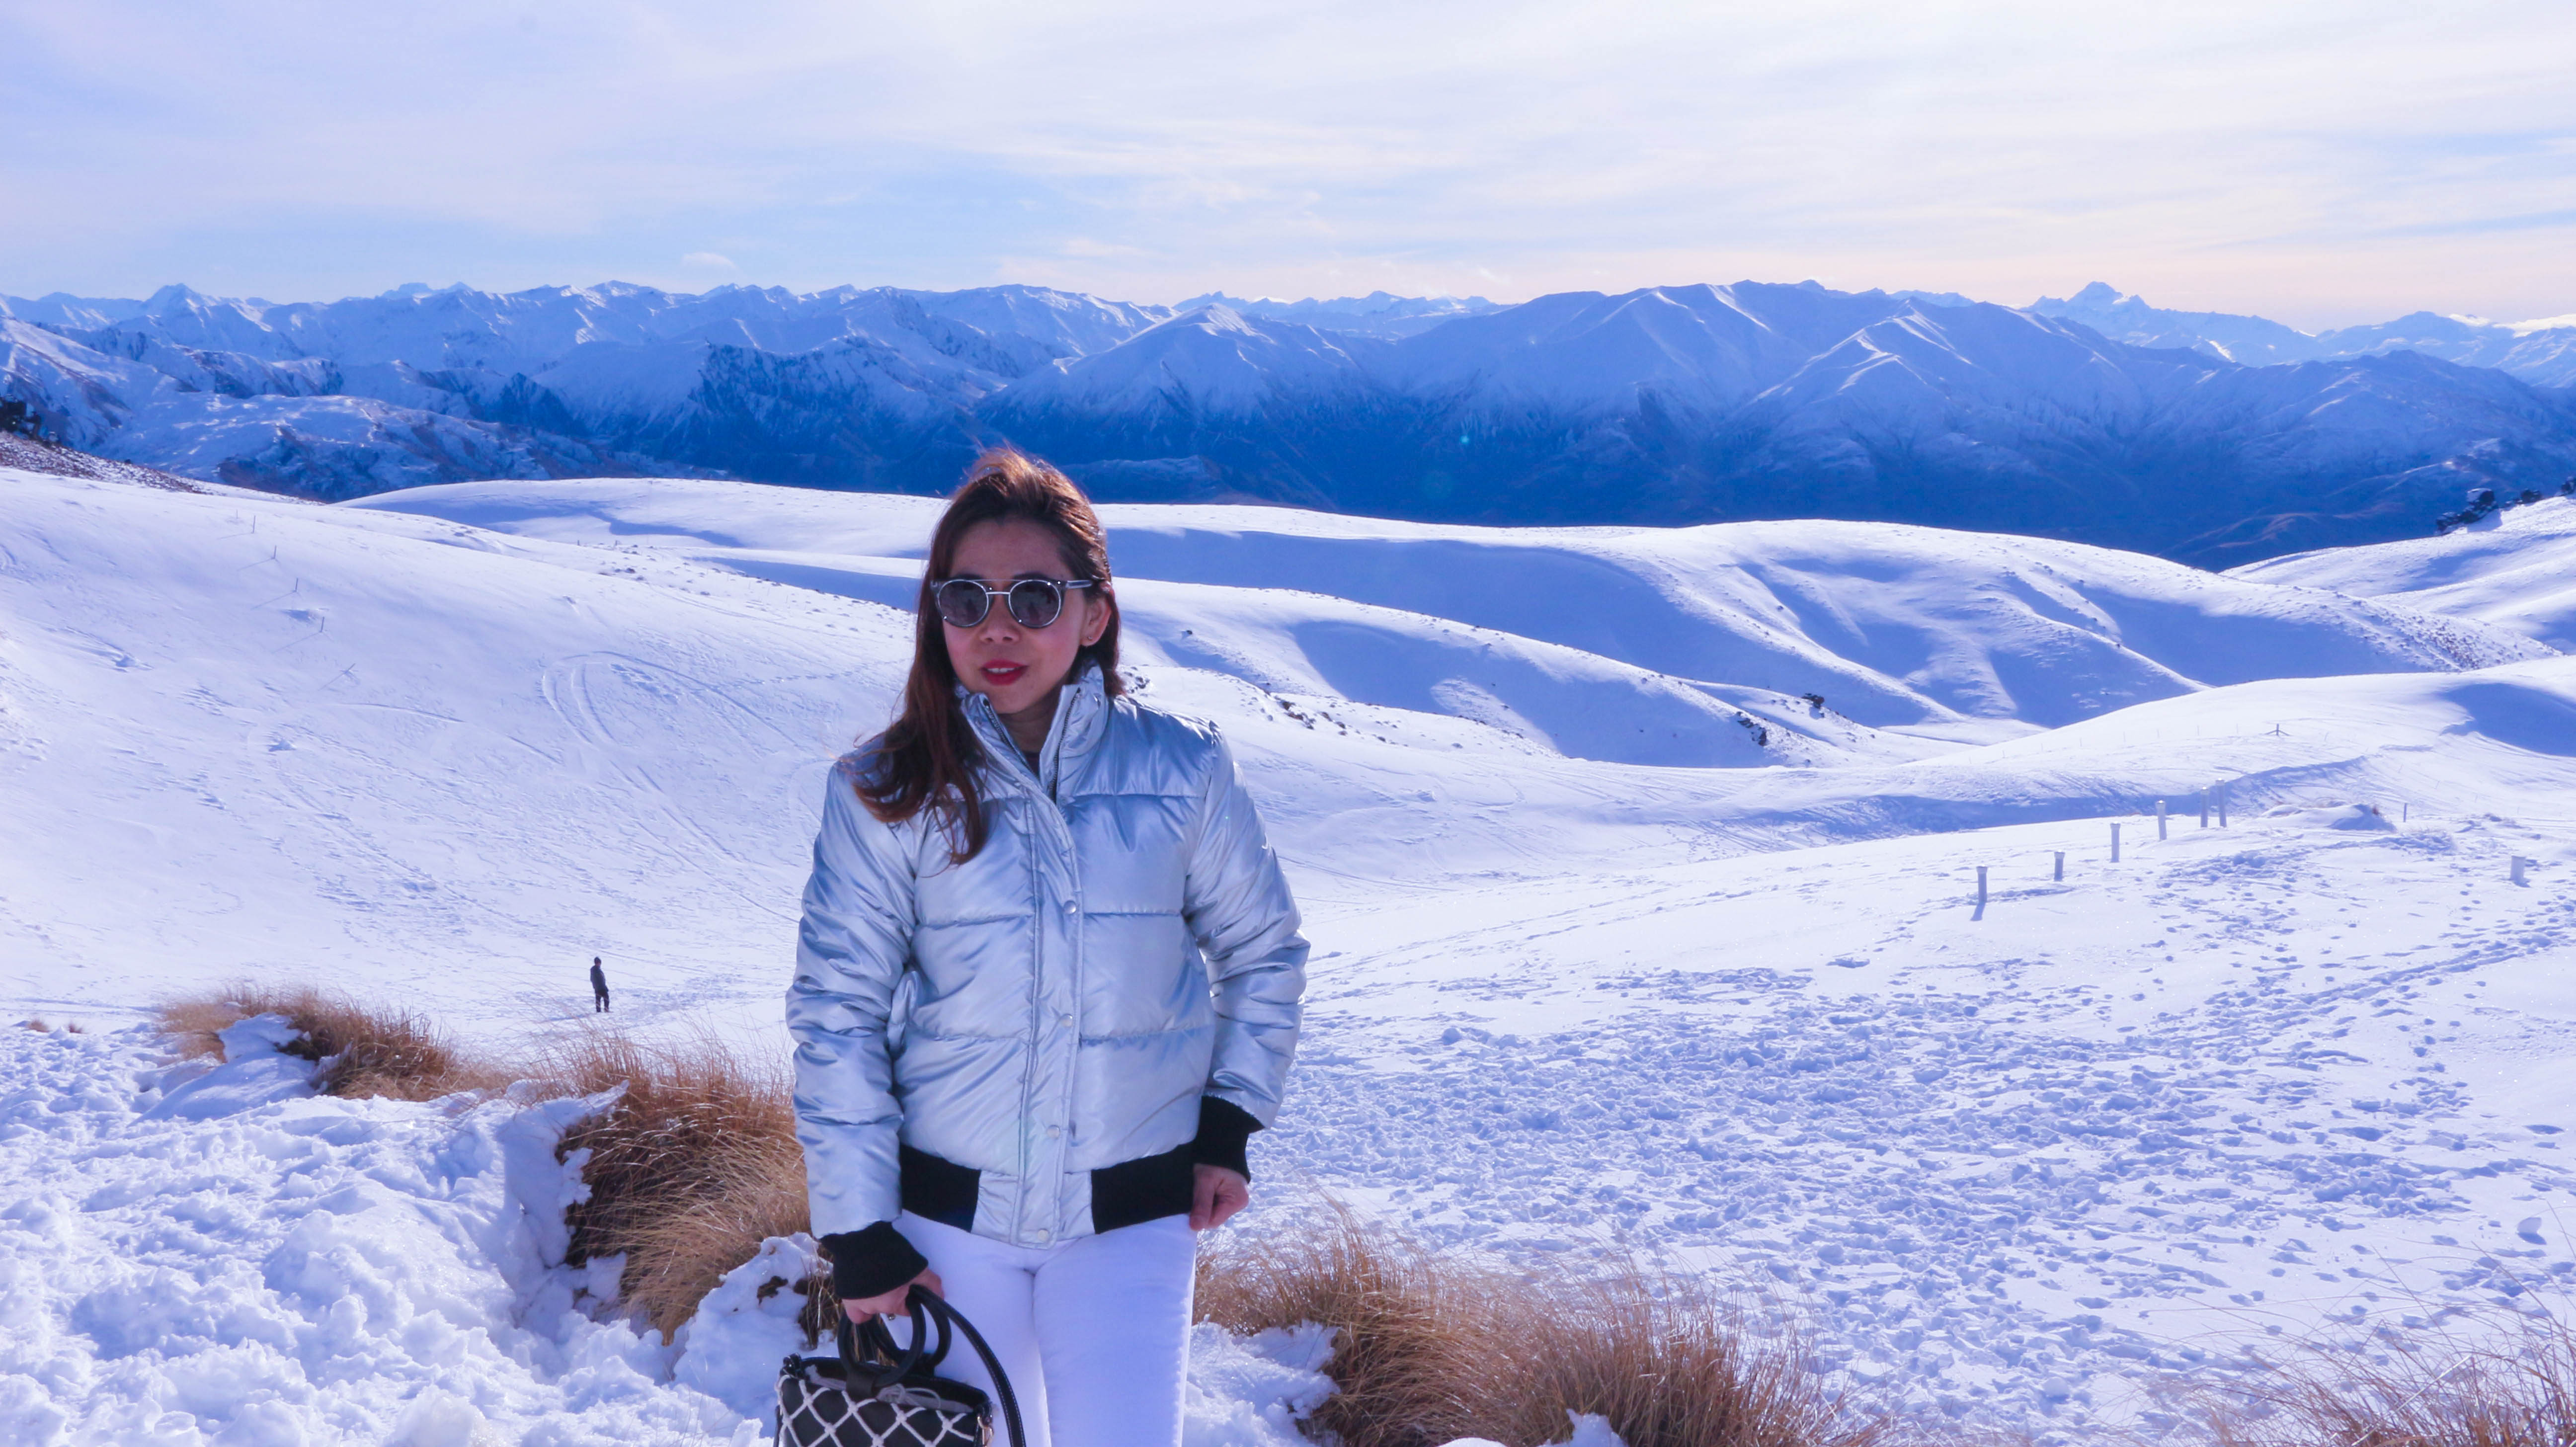 Where to ski in New Zealand